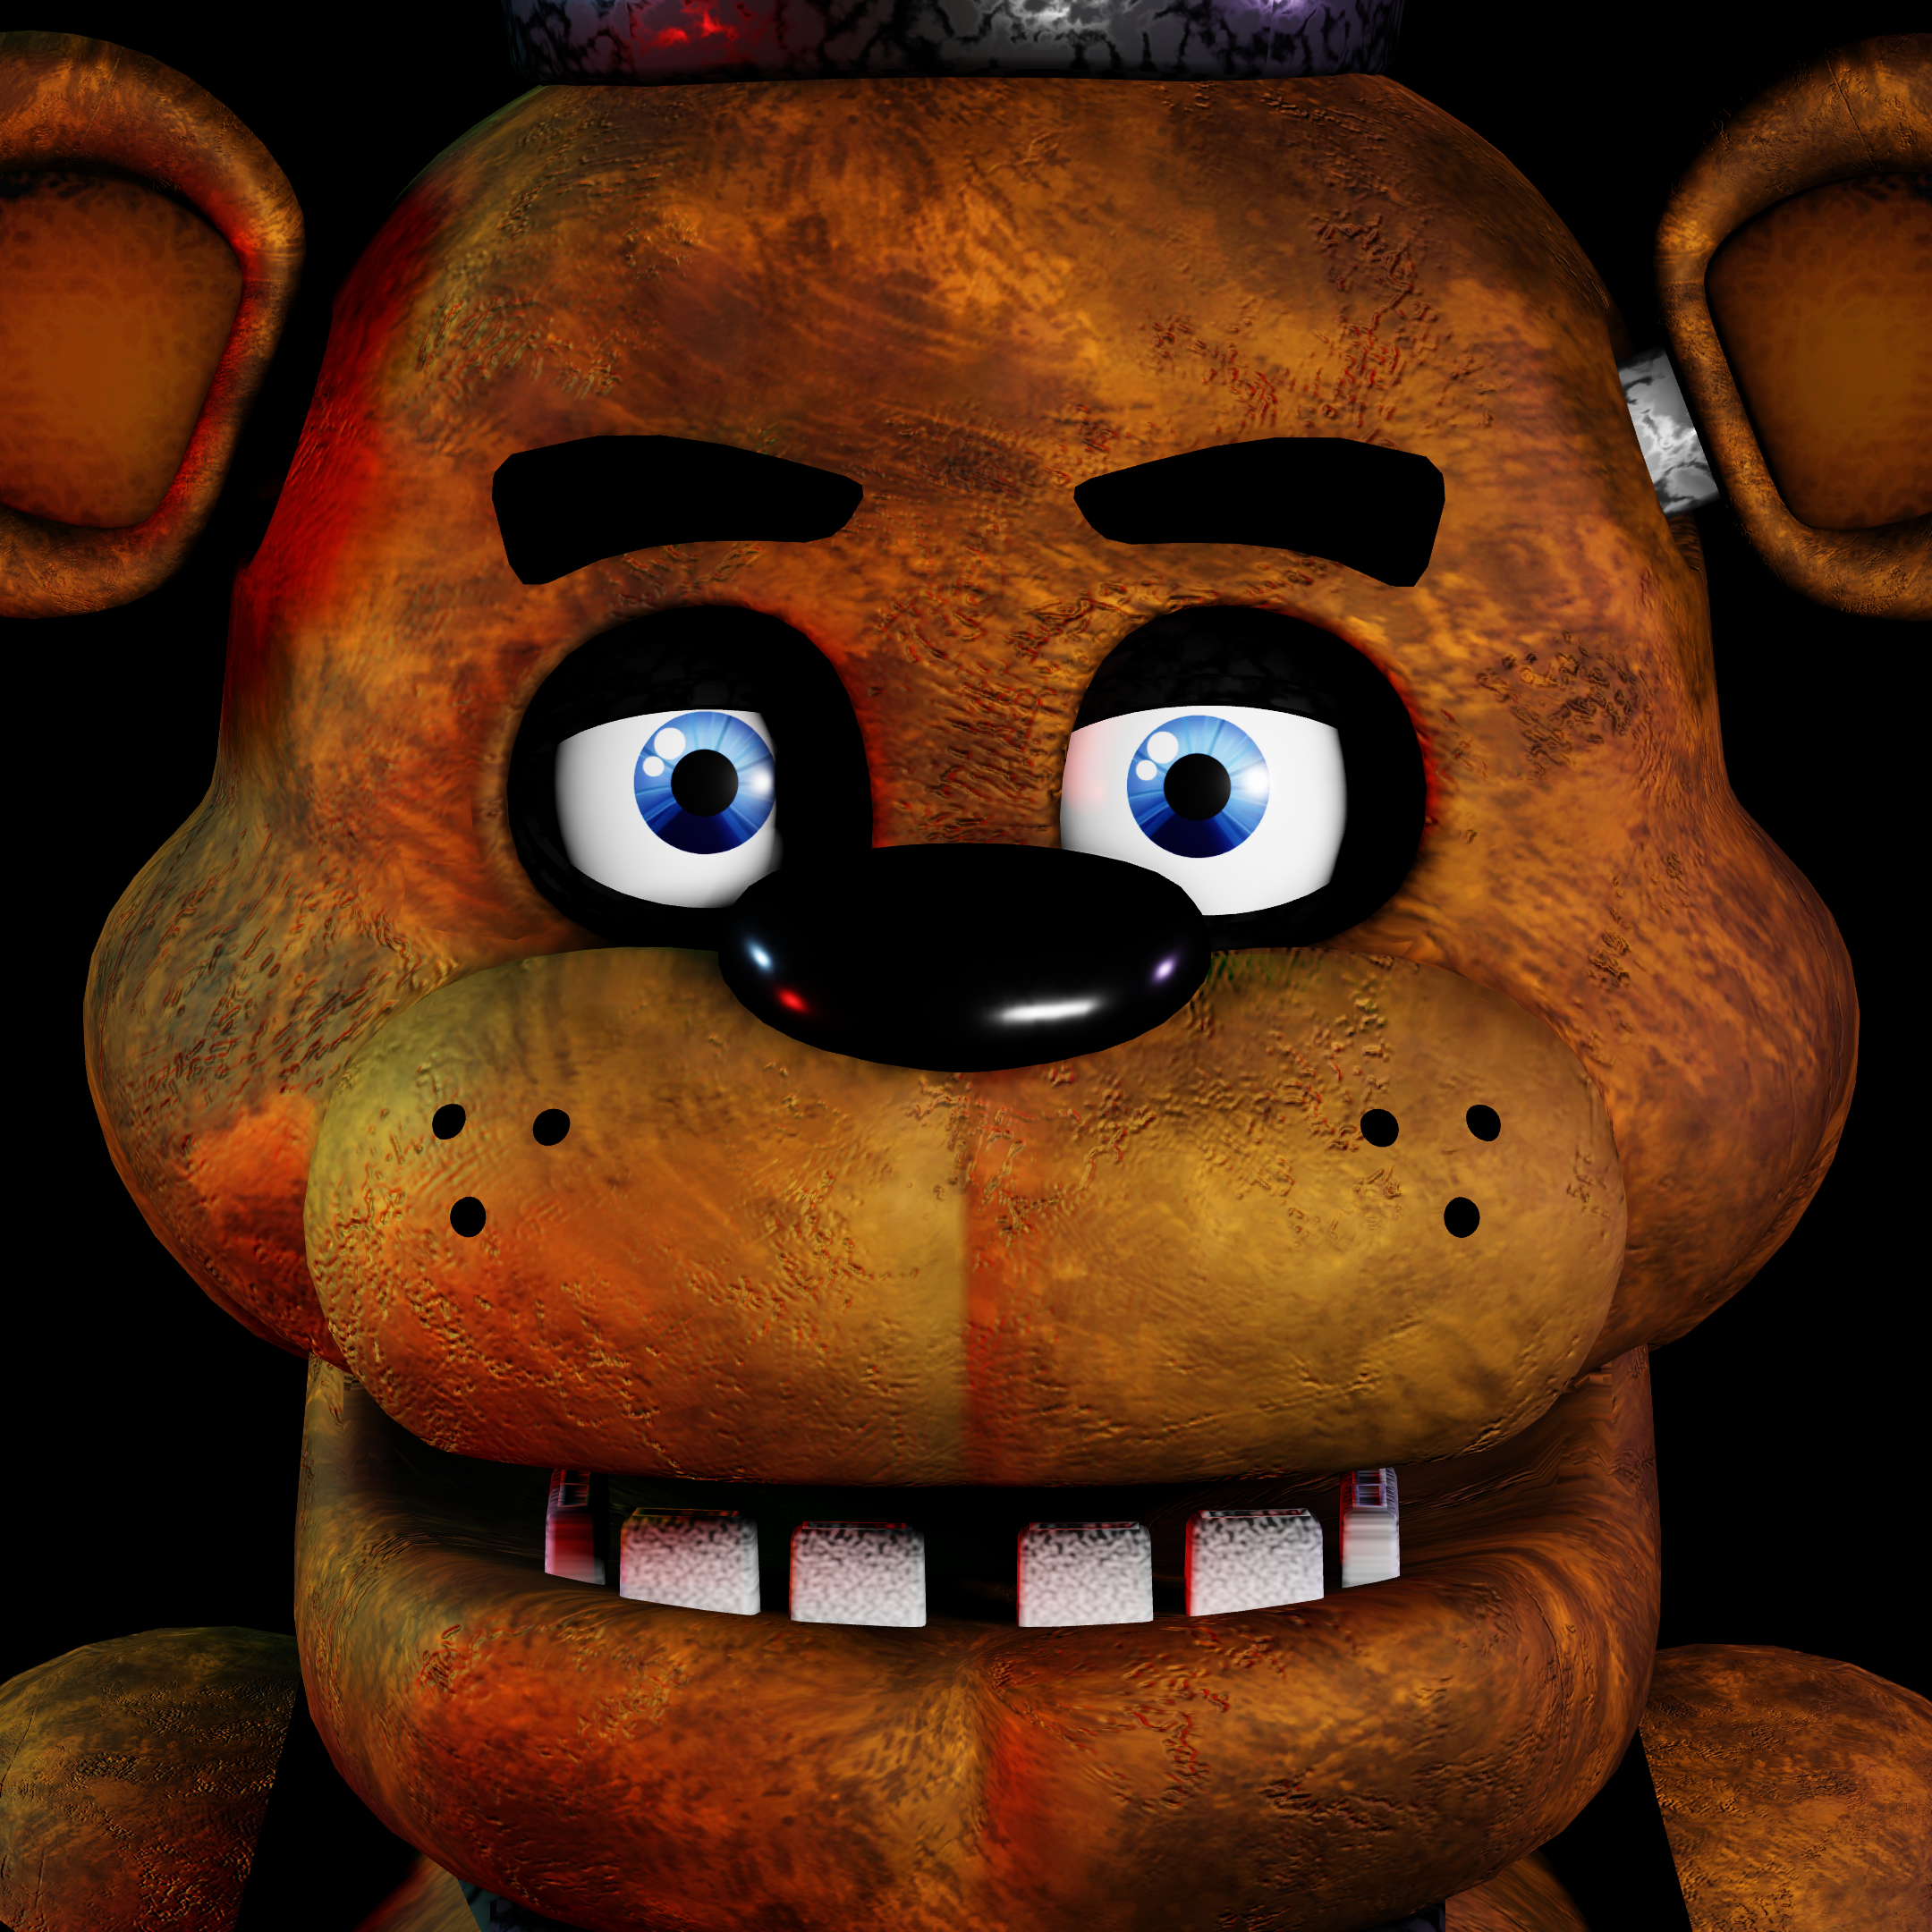 Five Nights at Freddy's 1 - Roblox